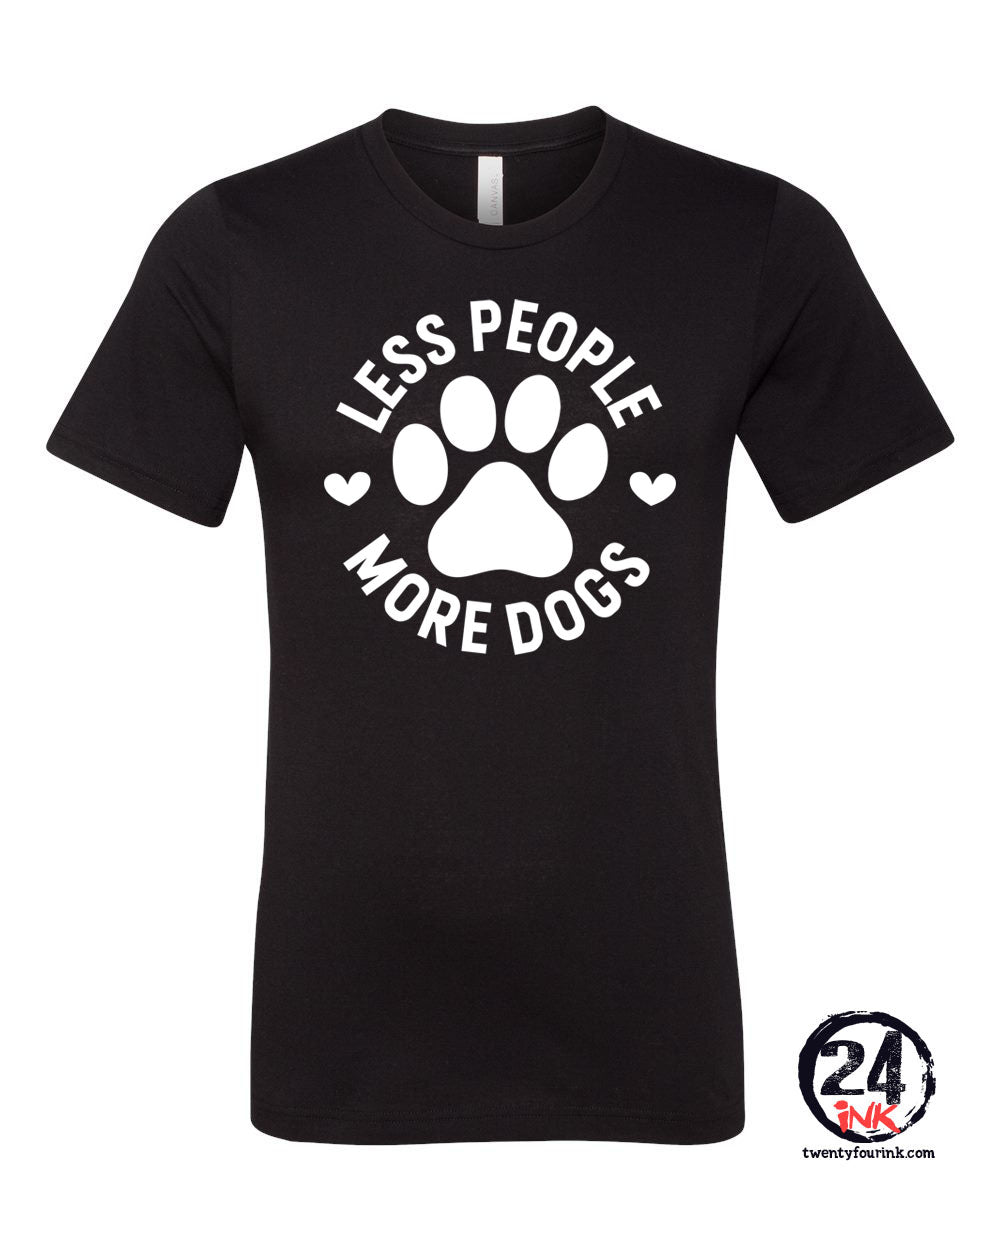 More dogs less people T-Shirt